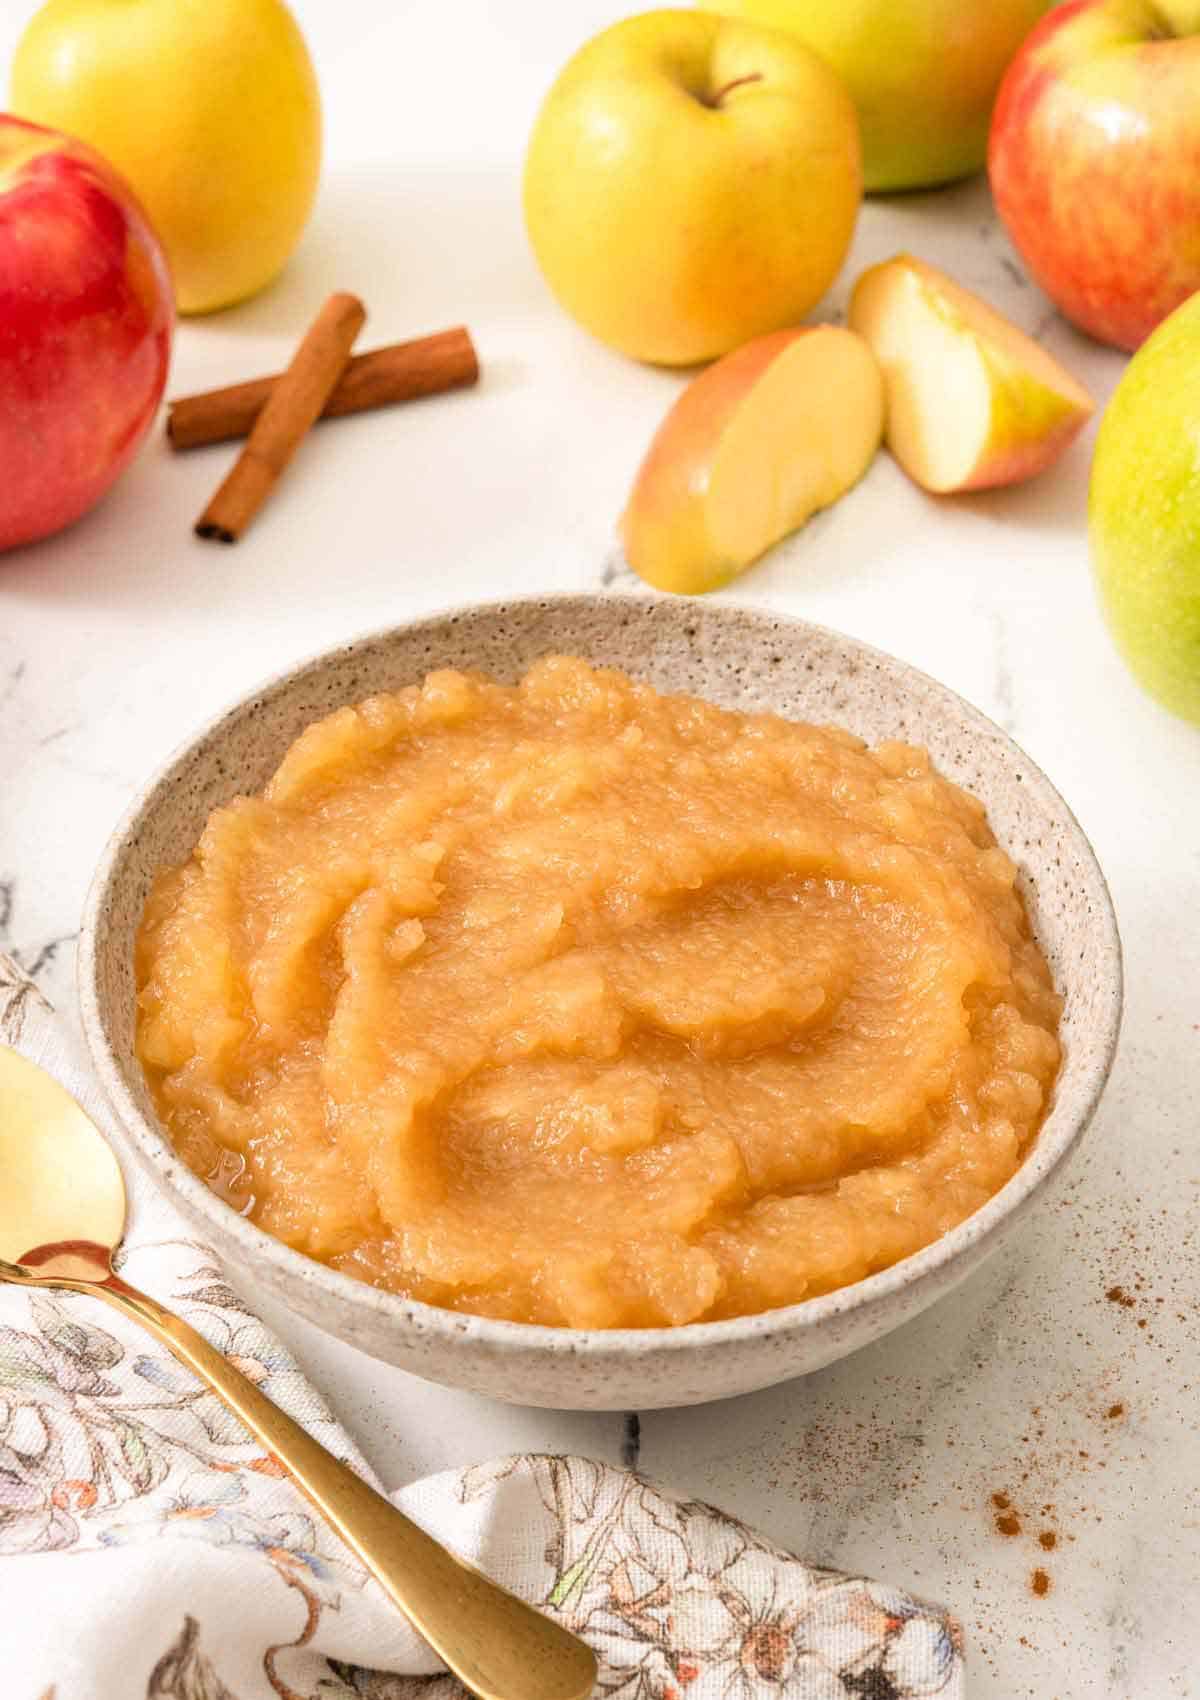 A bowl of apple sauce with fresh apples, some cut, in the background.